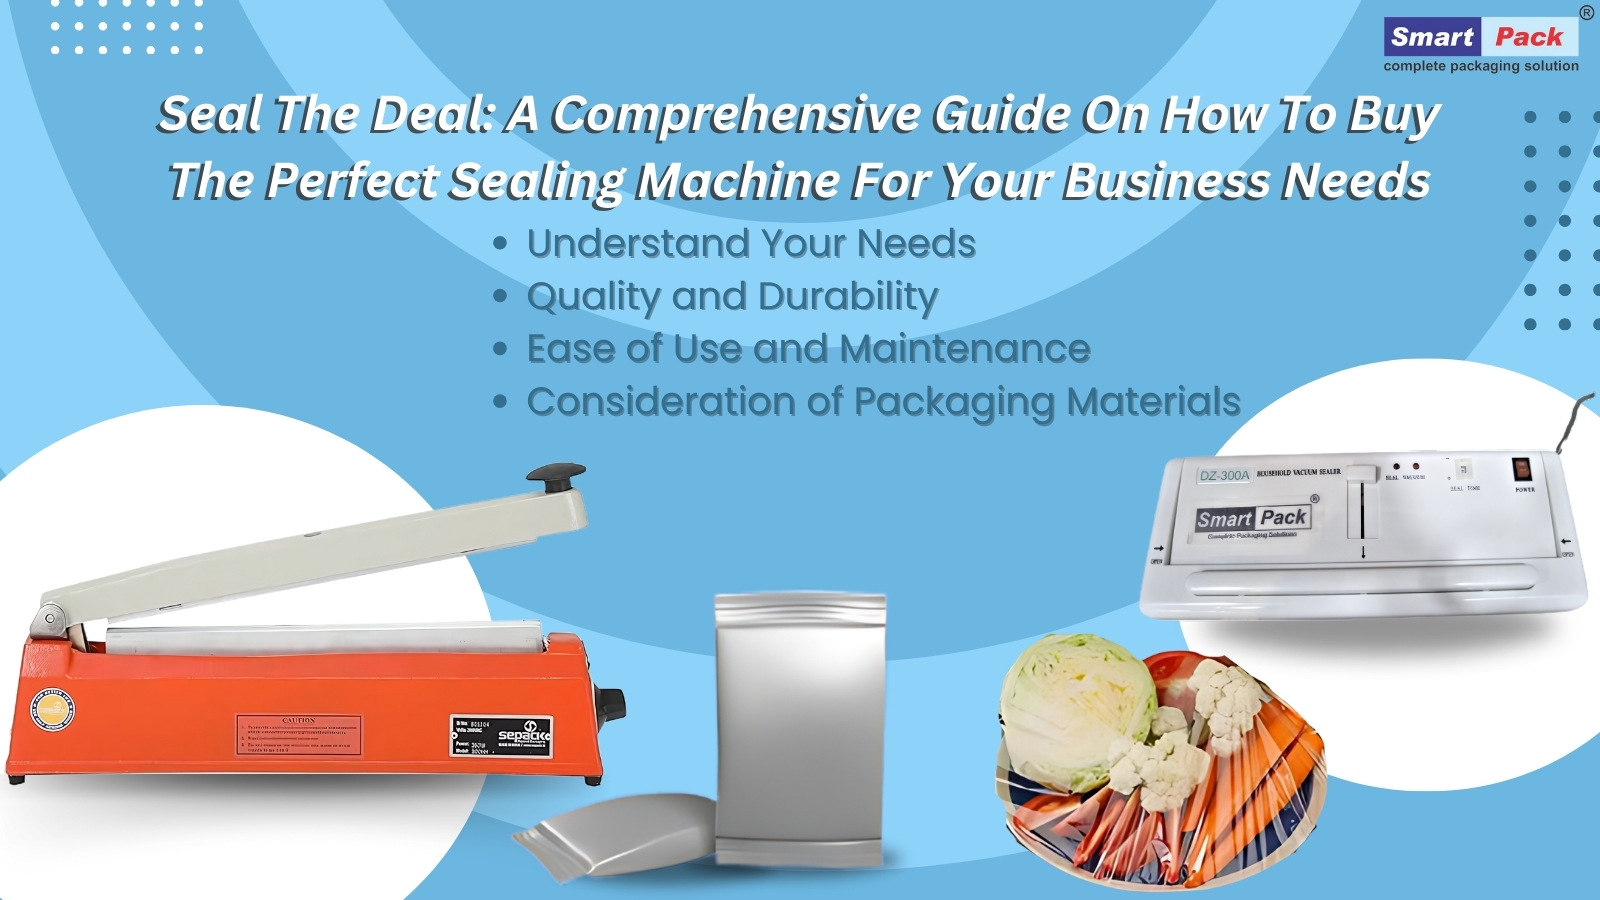 Seal the Deal: A Comprehensive Guide on How to Buy the Perfect Sealing Machine for Your Business Needs